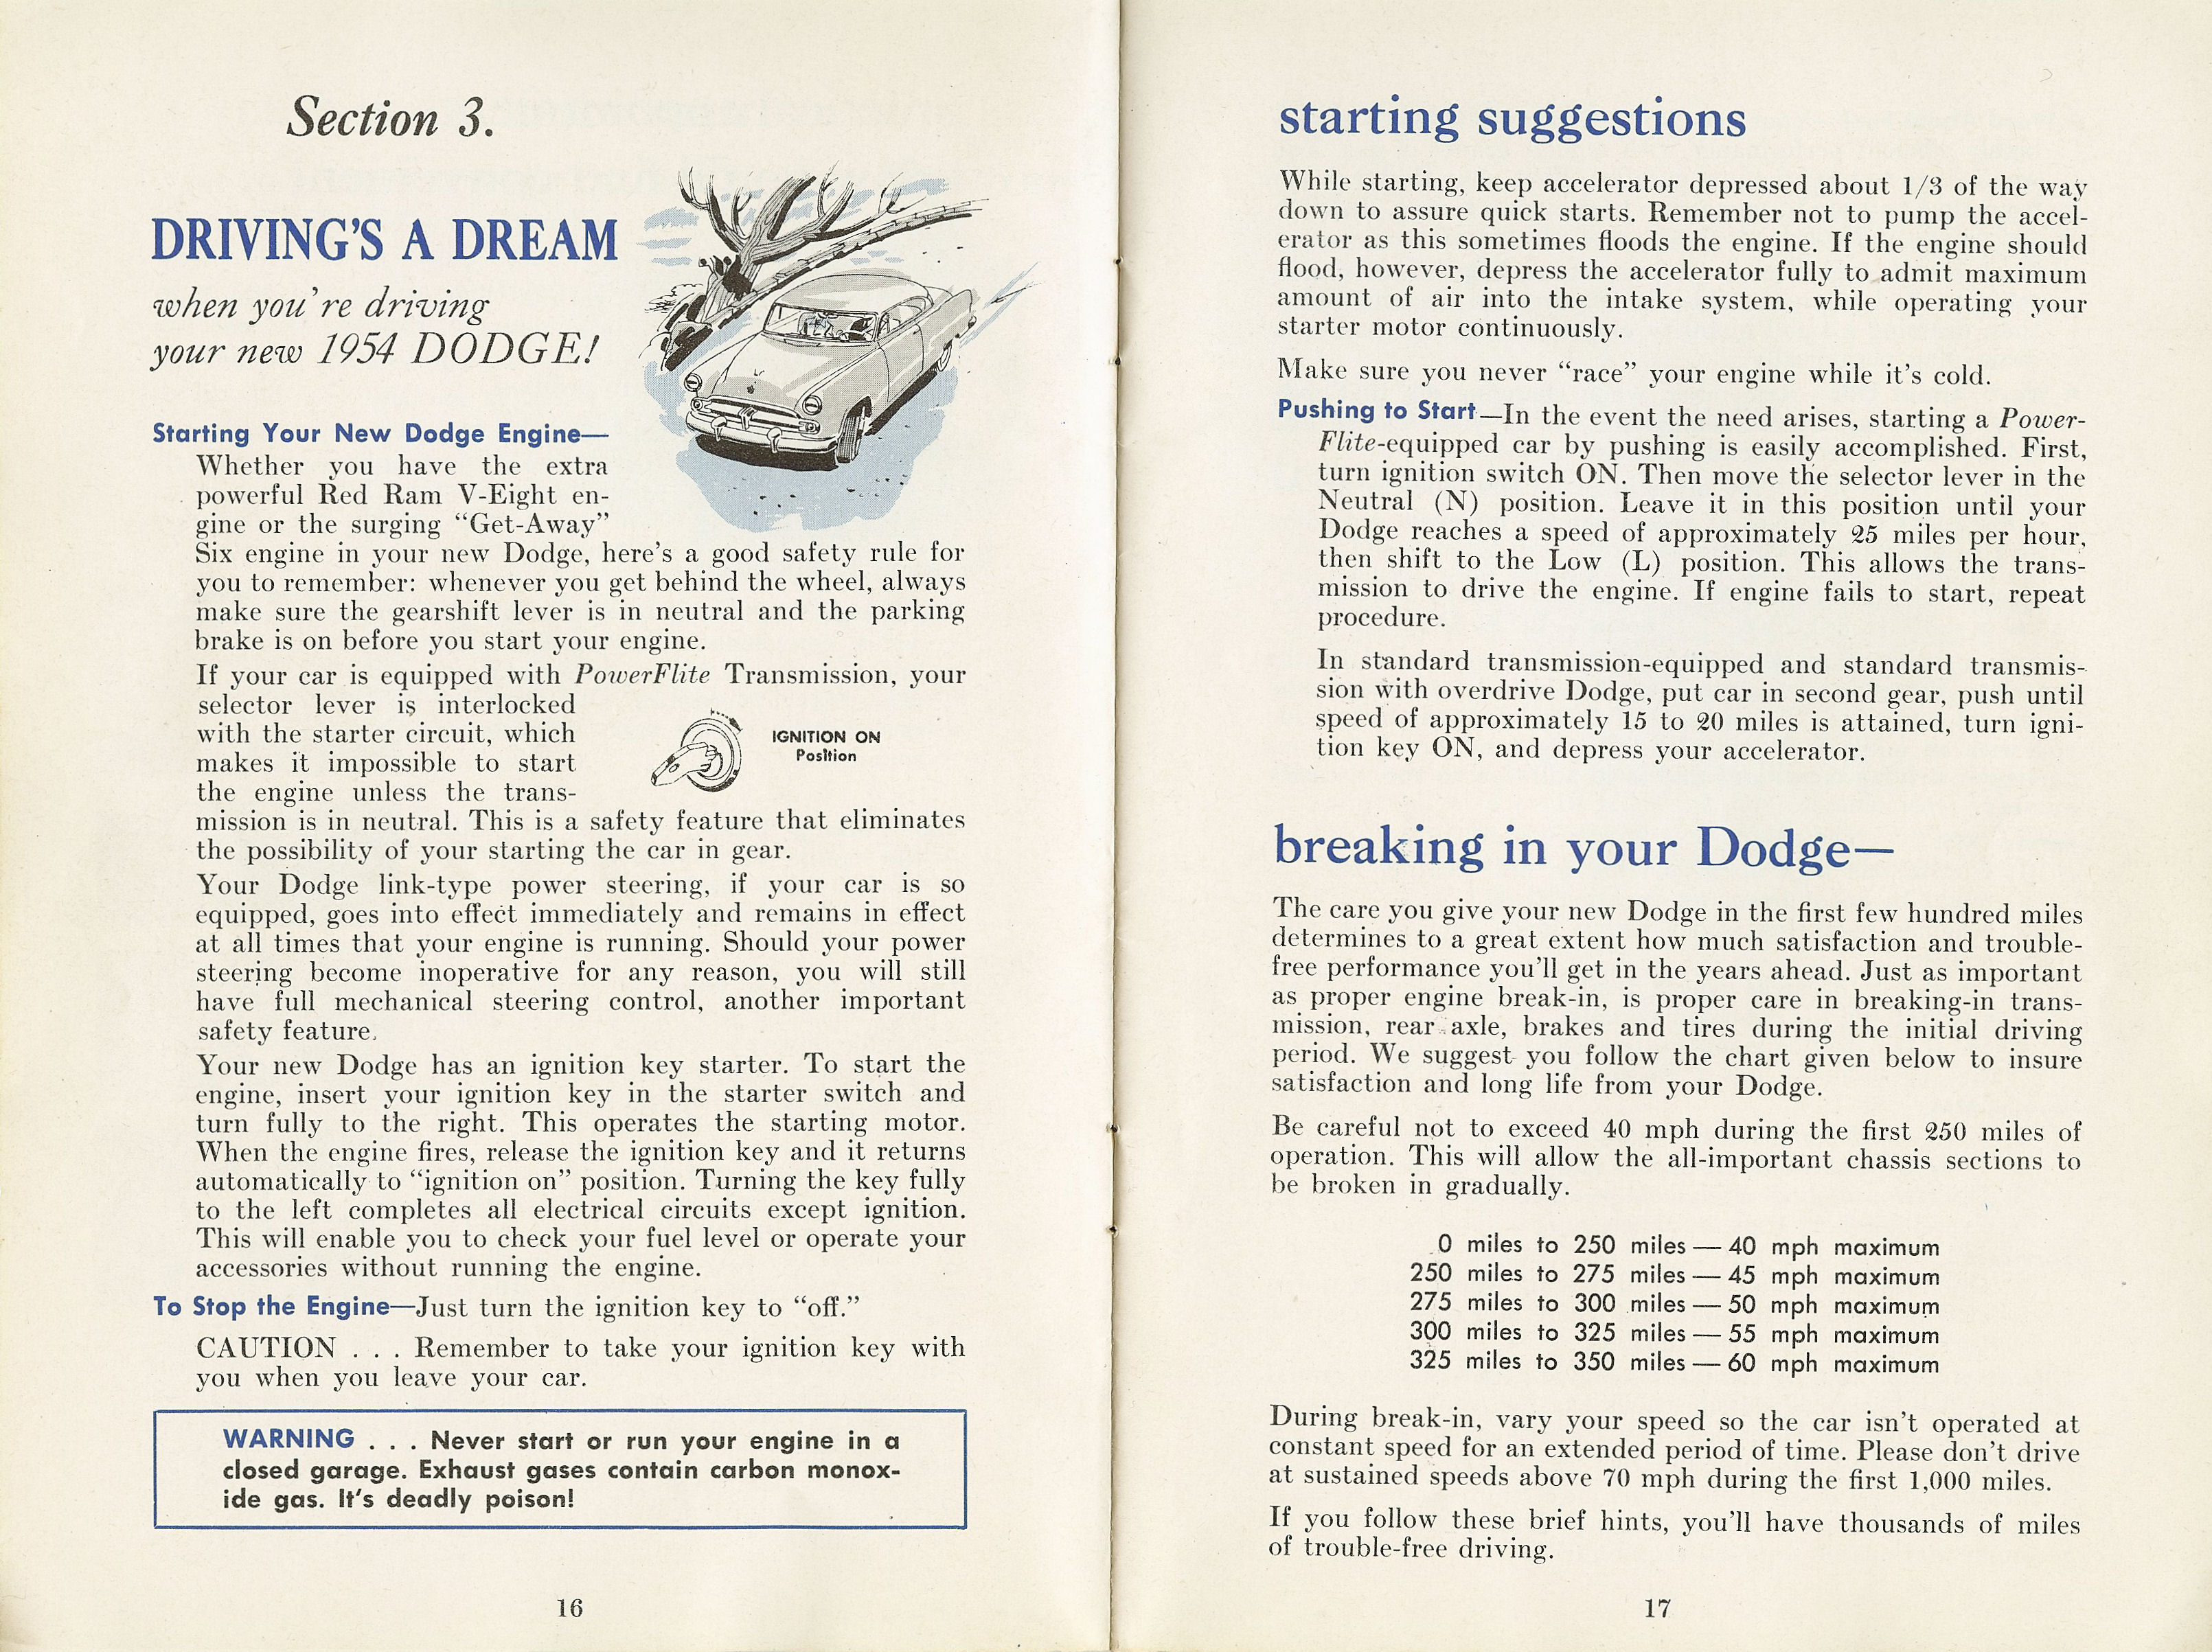 1954 Dodge Owners Manual-16-17